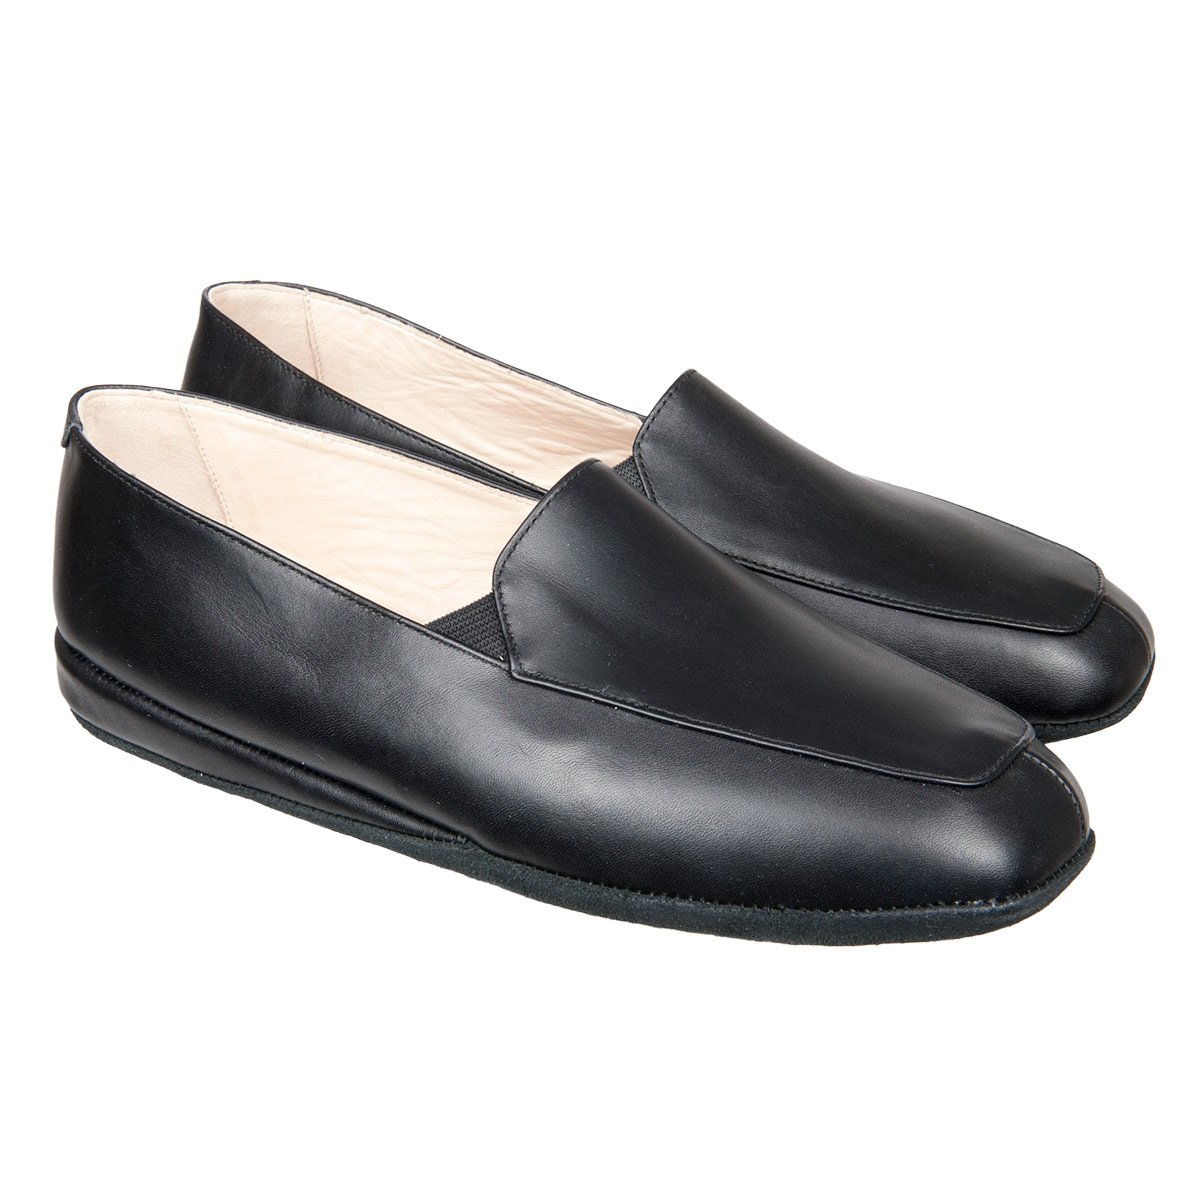 Leather slippers handmade in Italy in high-quality and robust for men